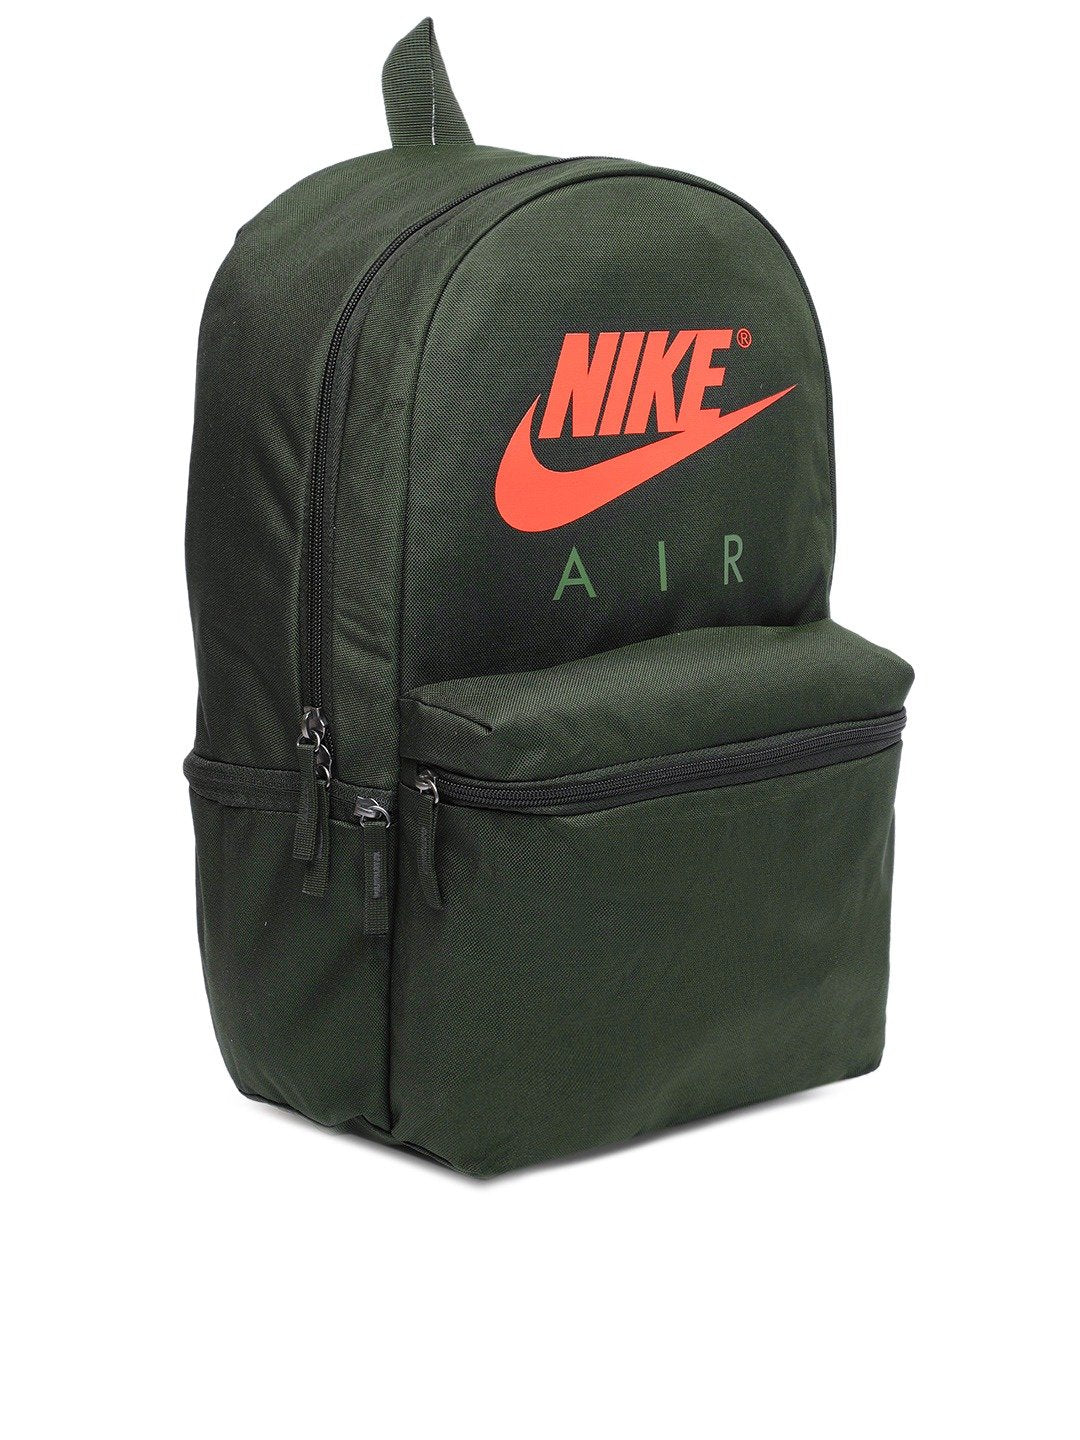 Unisex Green Brand Logo Air Backpack - Discount Store